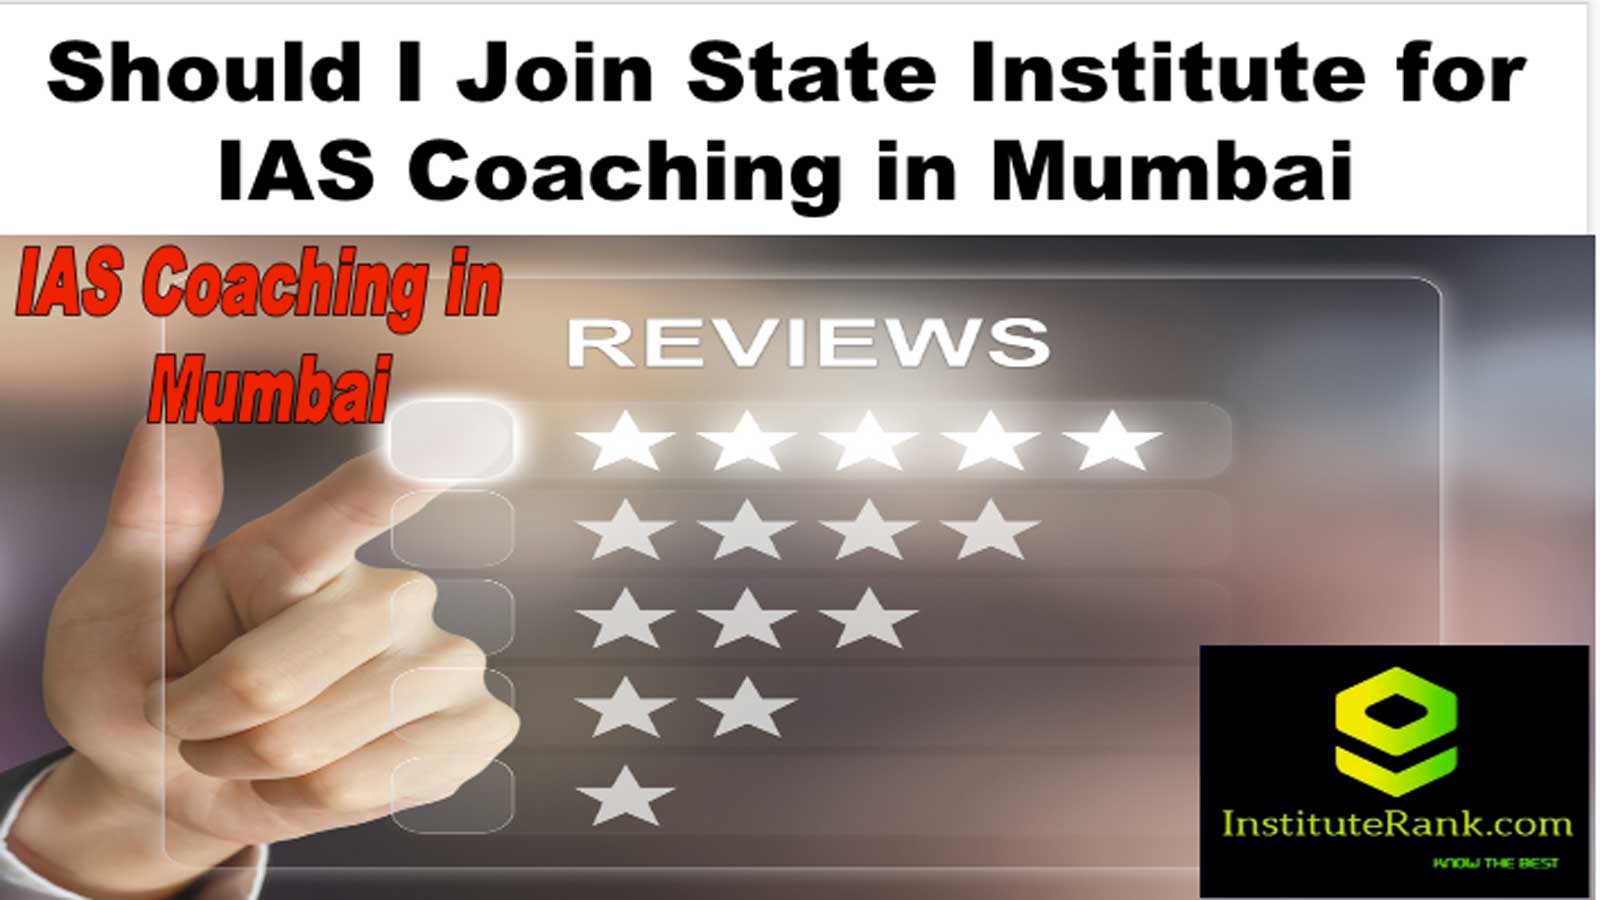 Should I Join State Institute for IAS Coaching in Mumbai